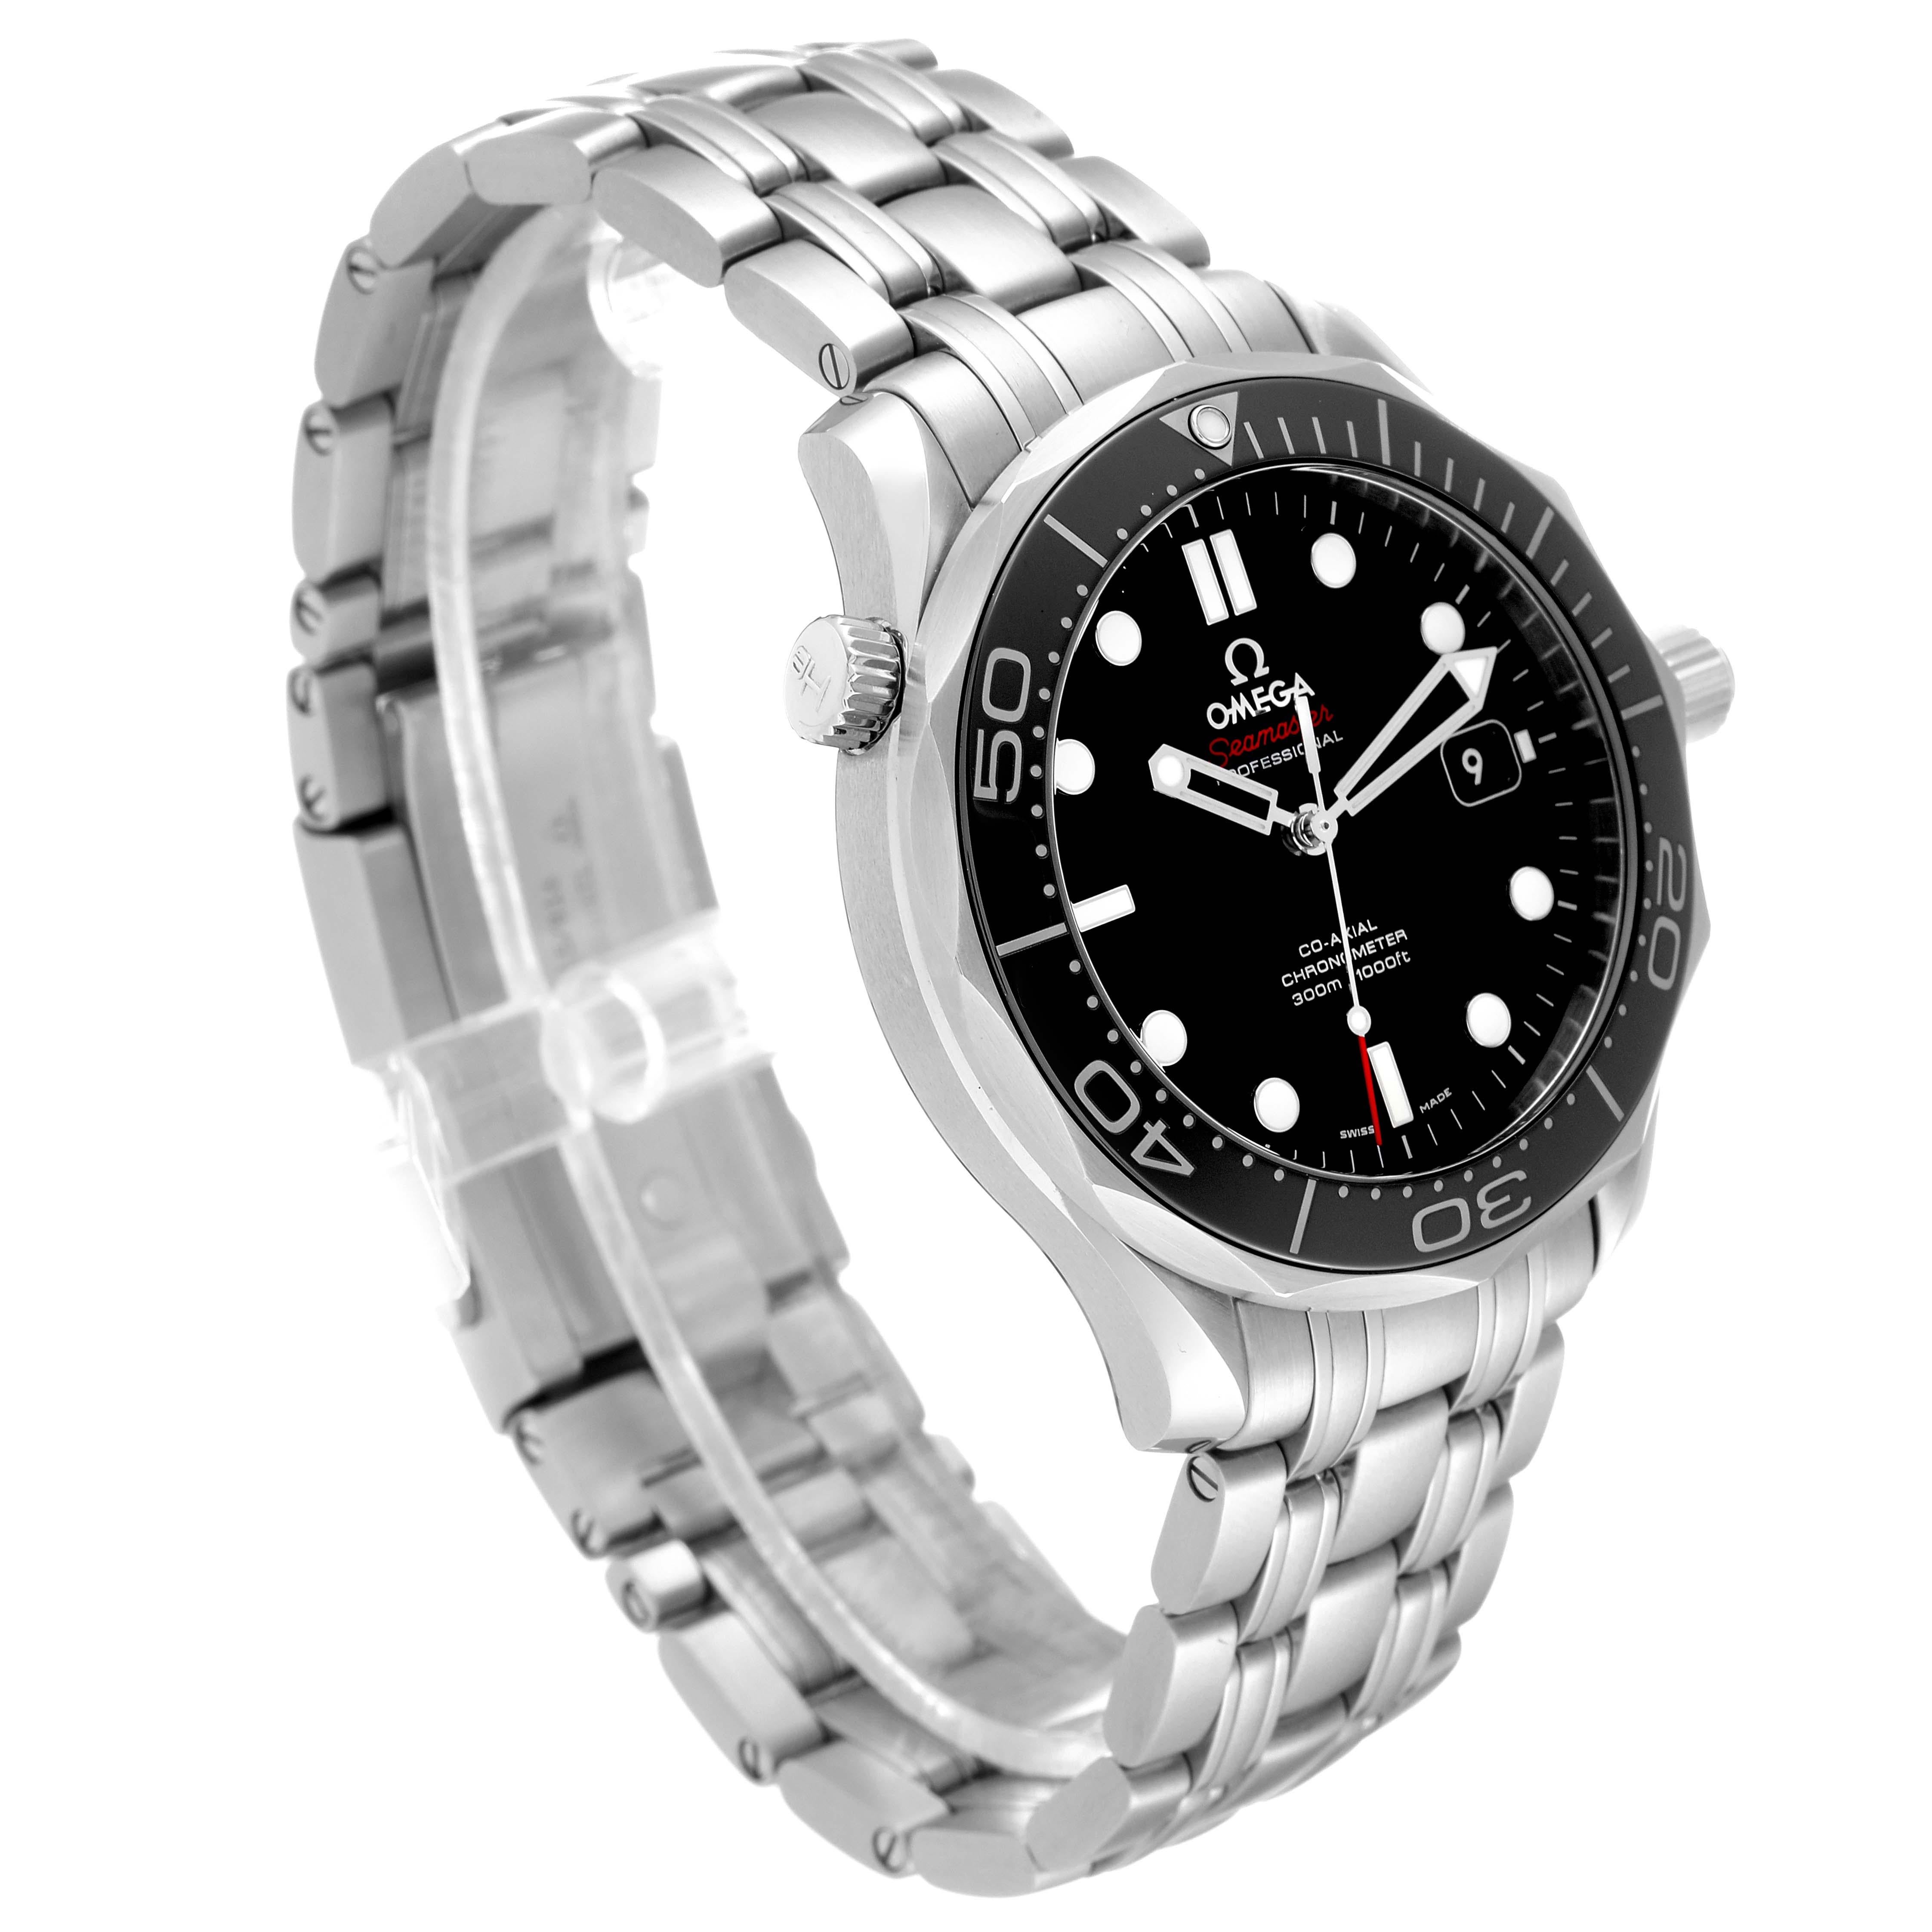 Men's Omega Seamaster Diver 300M Steel Mens Watch 212.30.41.20.01.003 Box Card For Sale